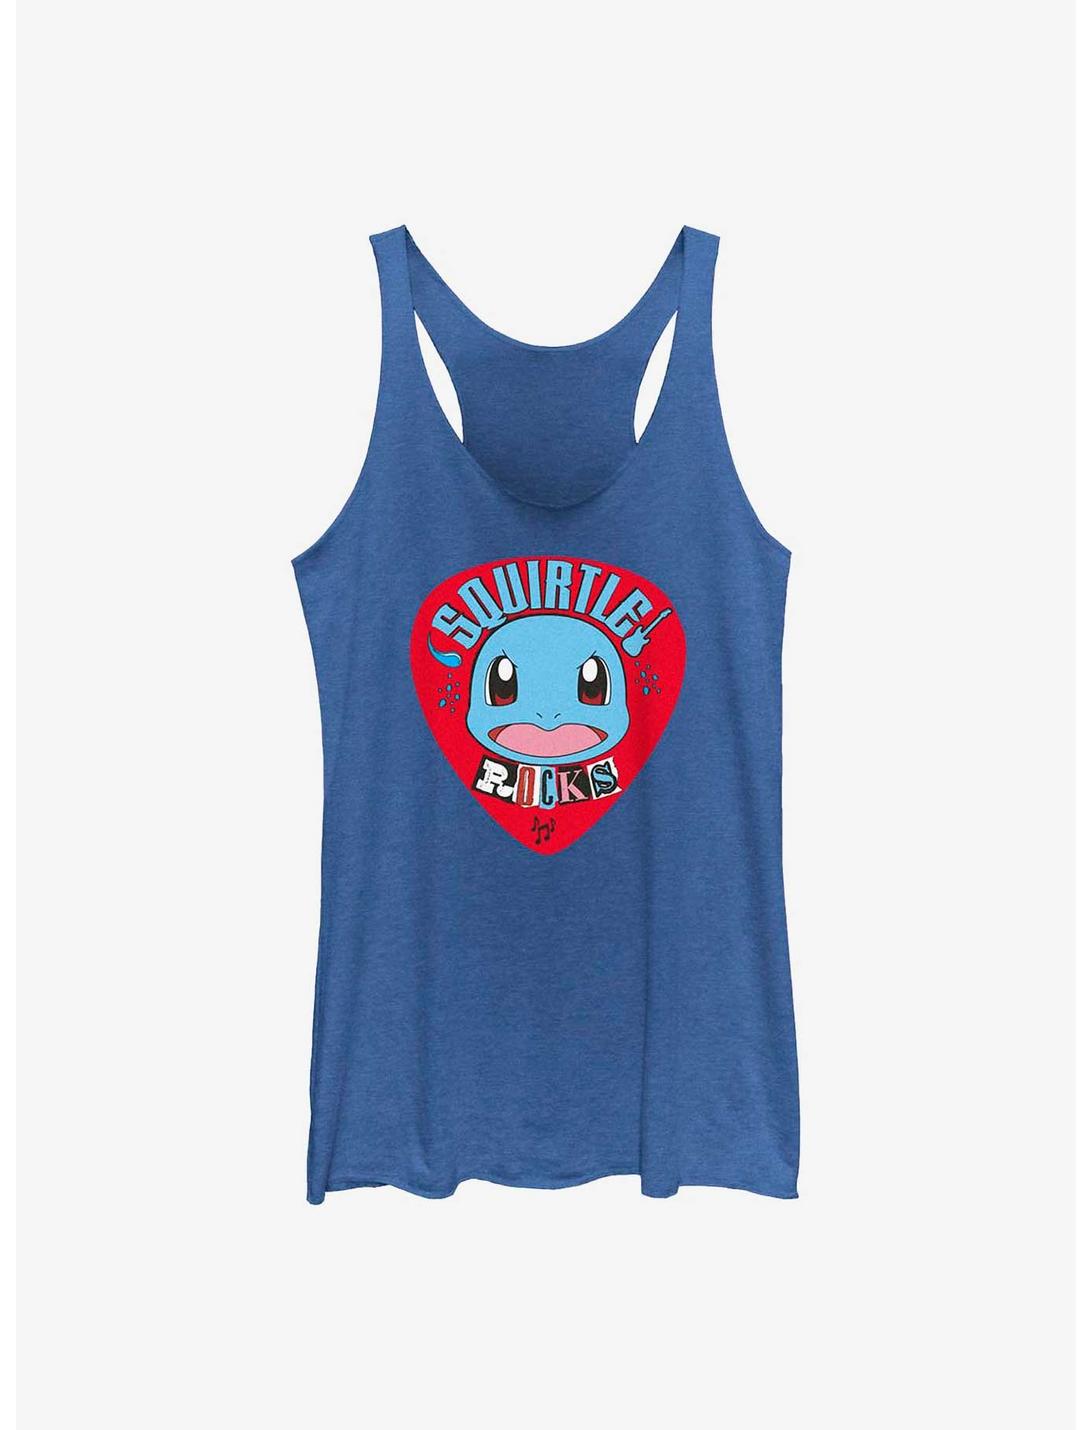 Pokemon Squirtle Rocks Womens Tank Top, ROY HTR, hi-res